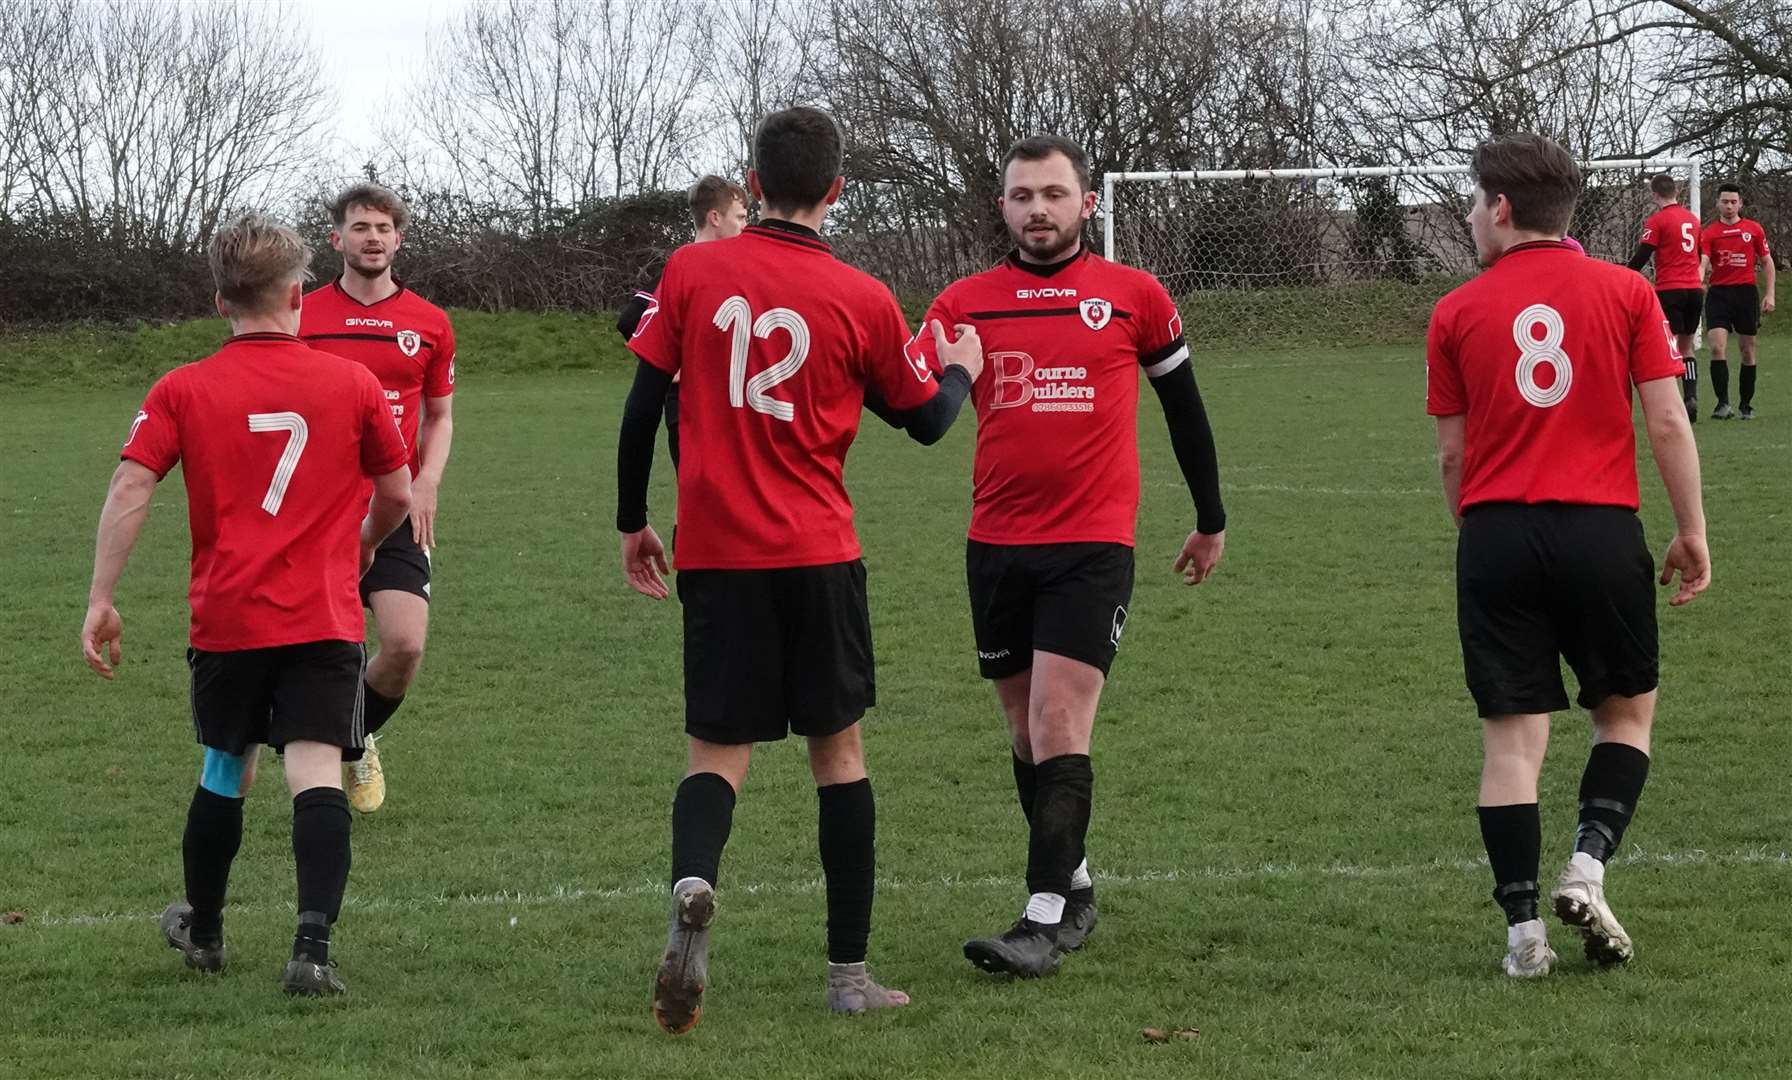 AFC Phoenix are thriving in their second season in the Sheppey Sunday League. Picture: Daniel Olteanu